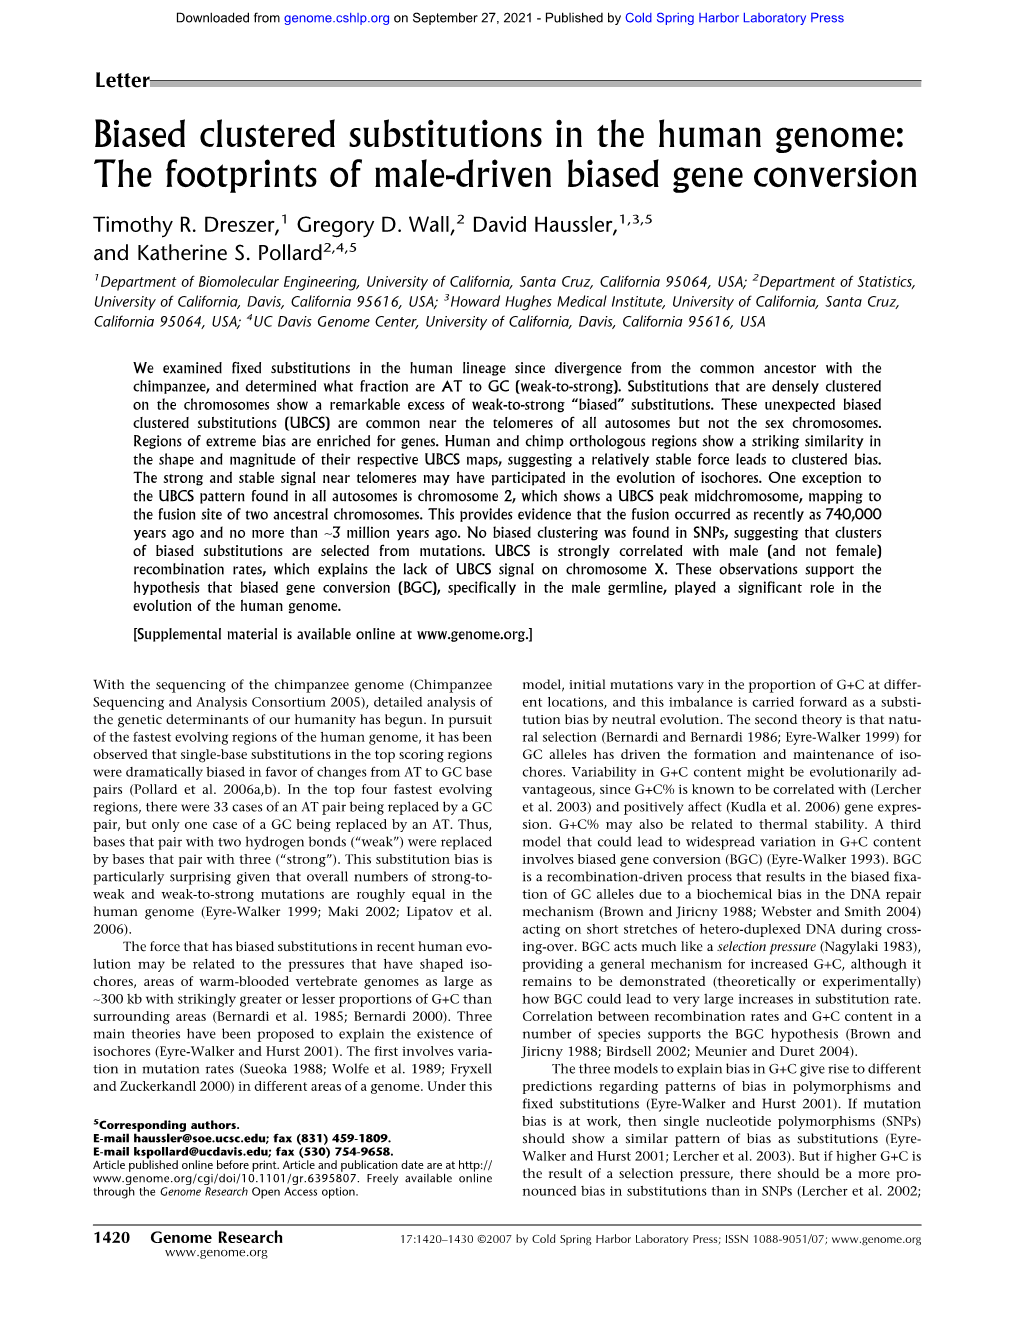 Biased Clustered Substitutions in the Human Genome: the Footprints of Male-Driven Biased Gene Conversion